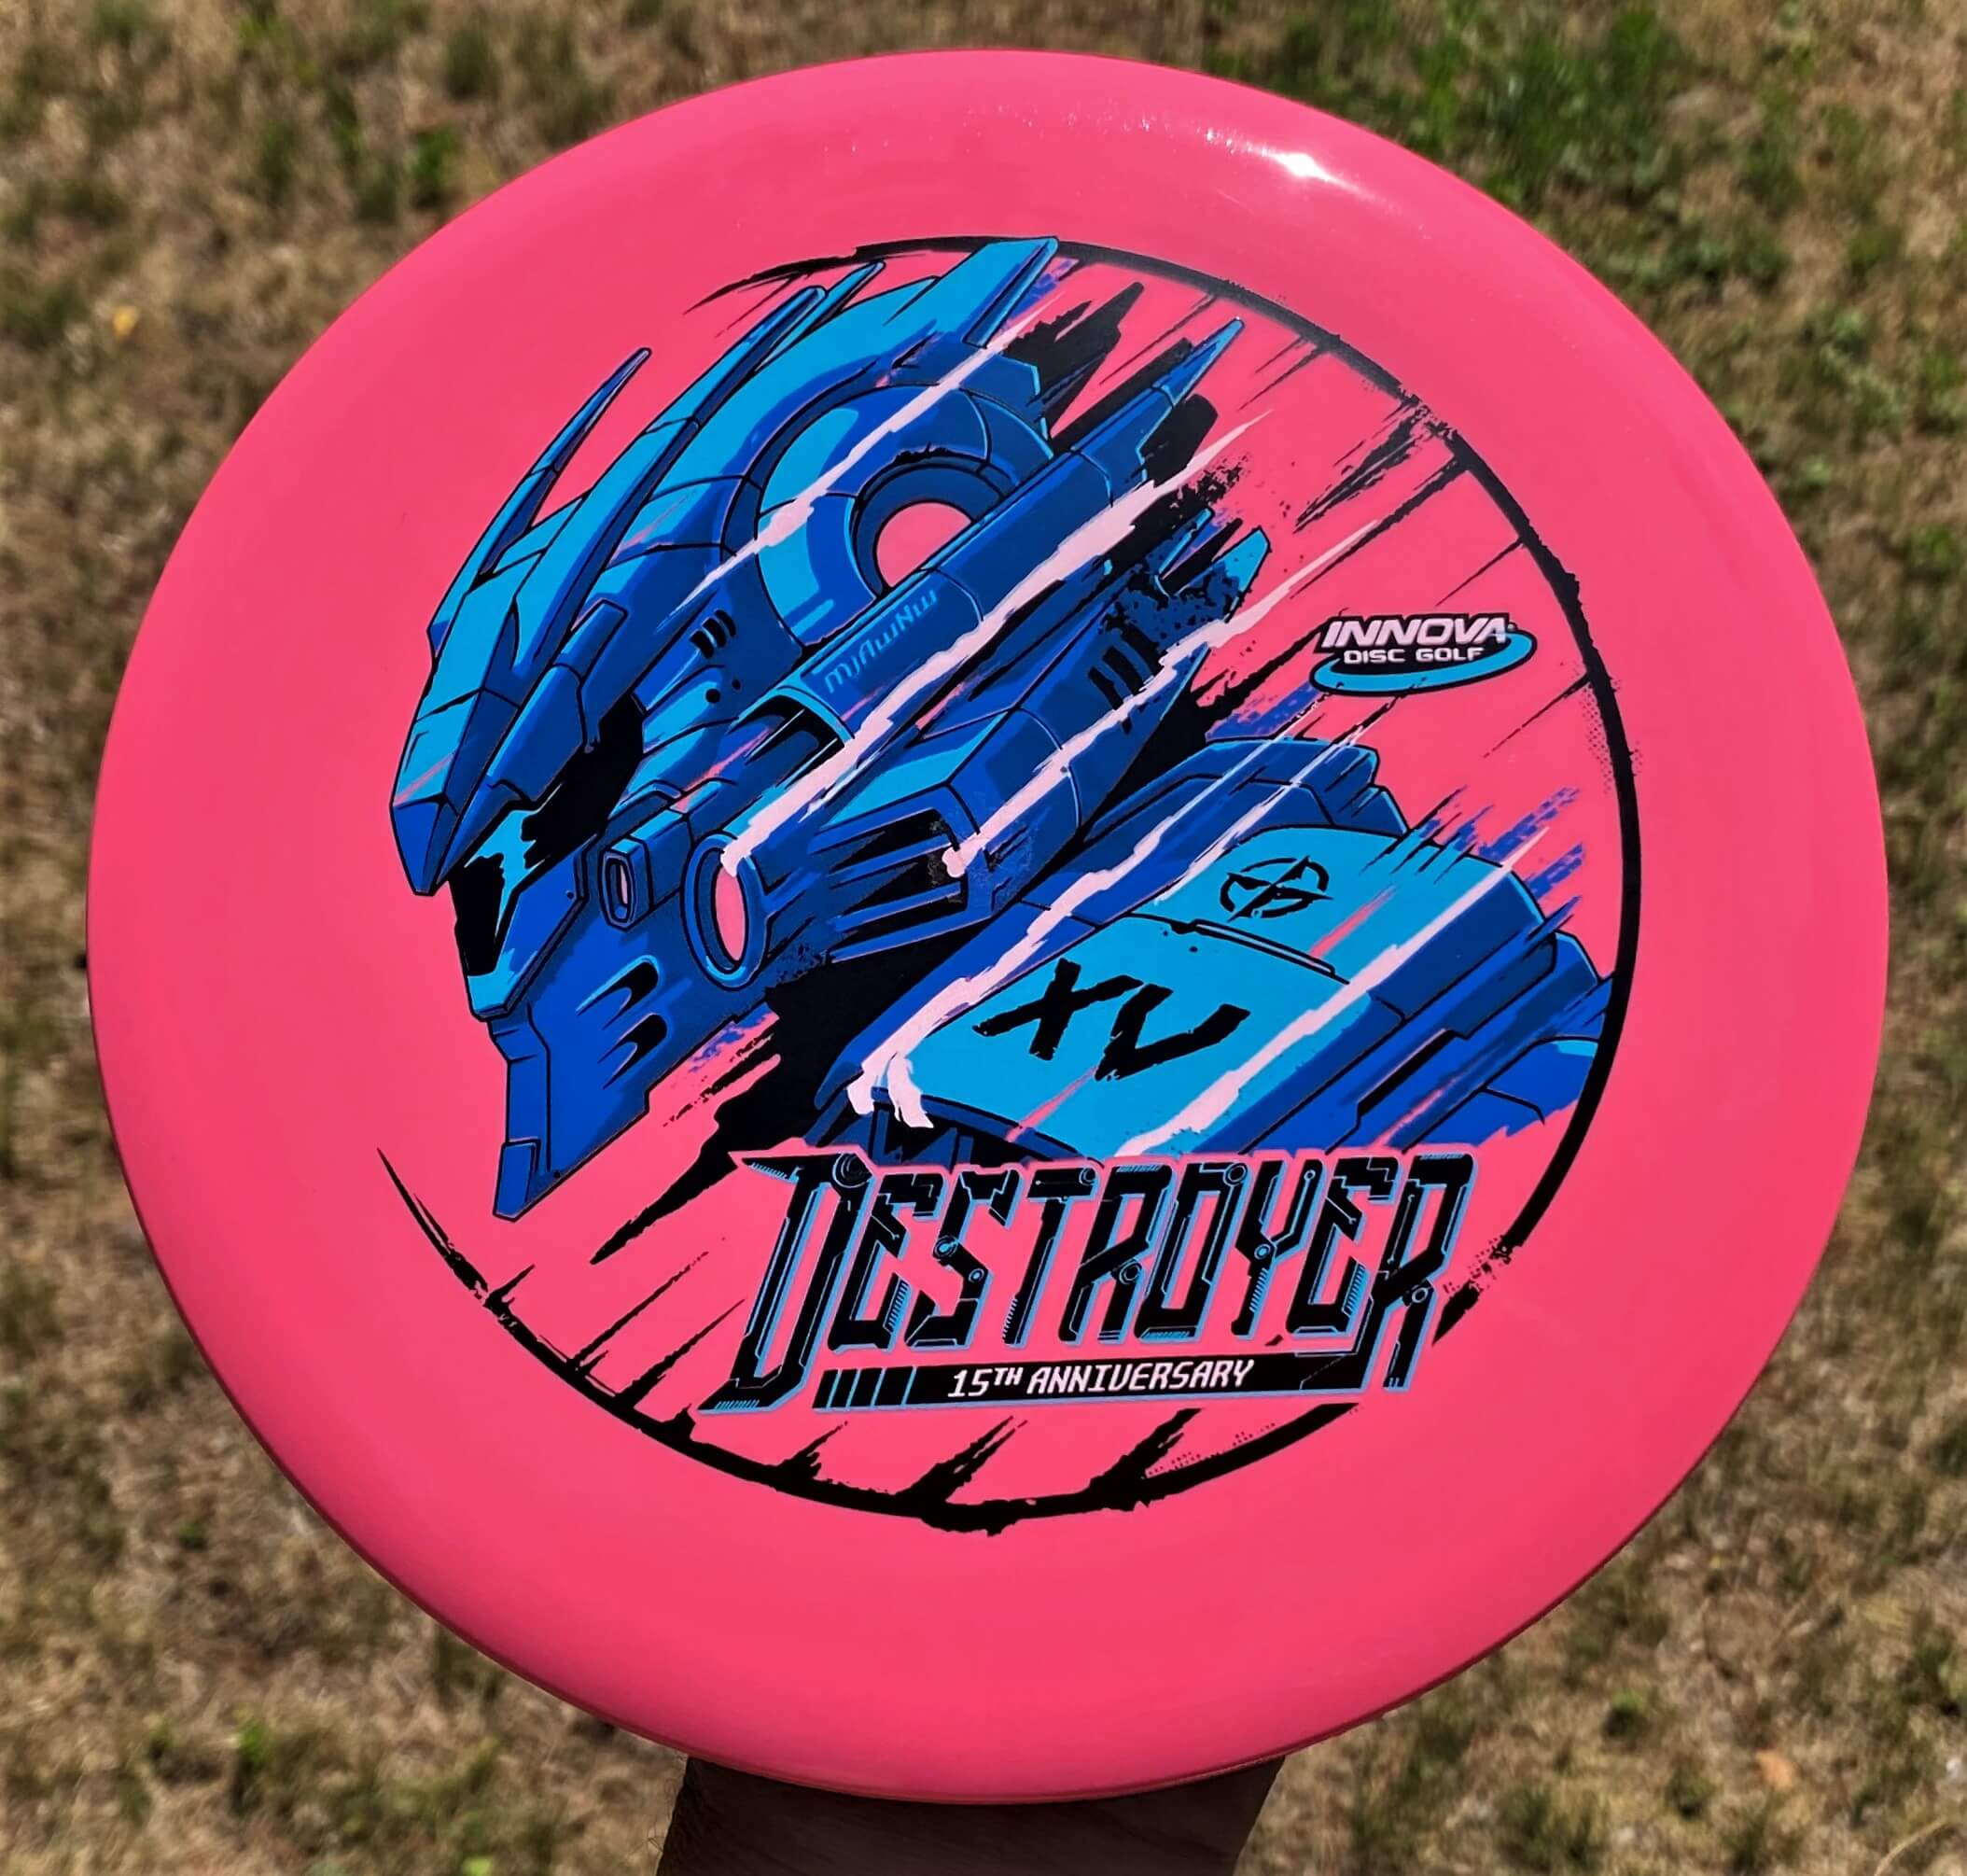 Friend of my decided to order custom stamp Destroyer with this anime  picture on it  rdiscgolf